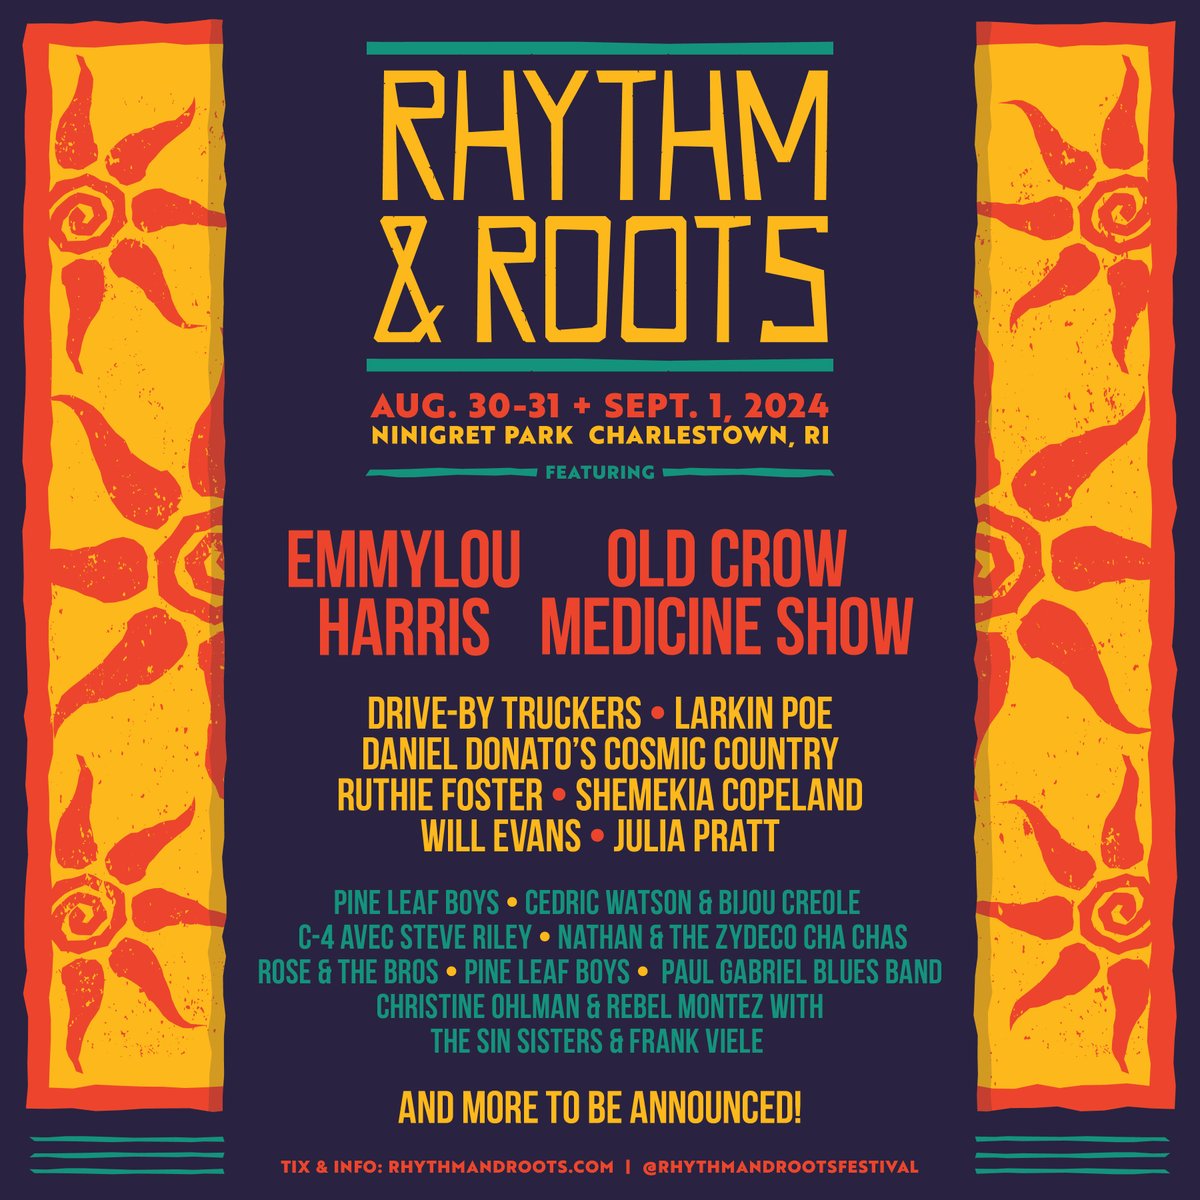 Rhythm & Roots 2024 🤘 Labor Day Weekend. Y'all come out. A good time will be had 🤘 🎟️ rhythmandroots.com